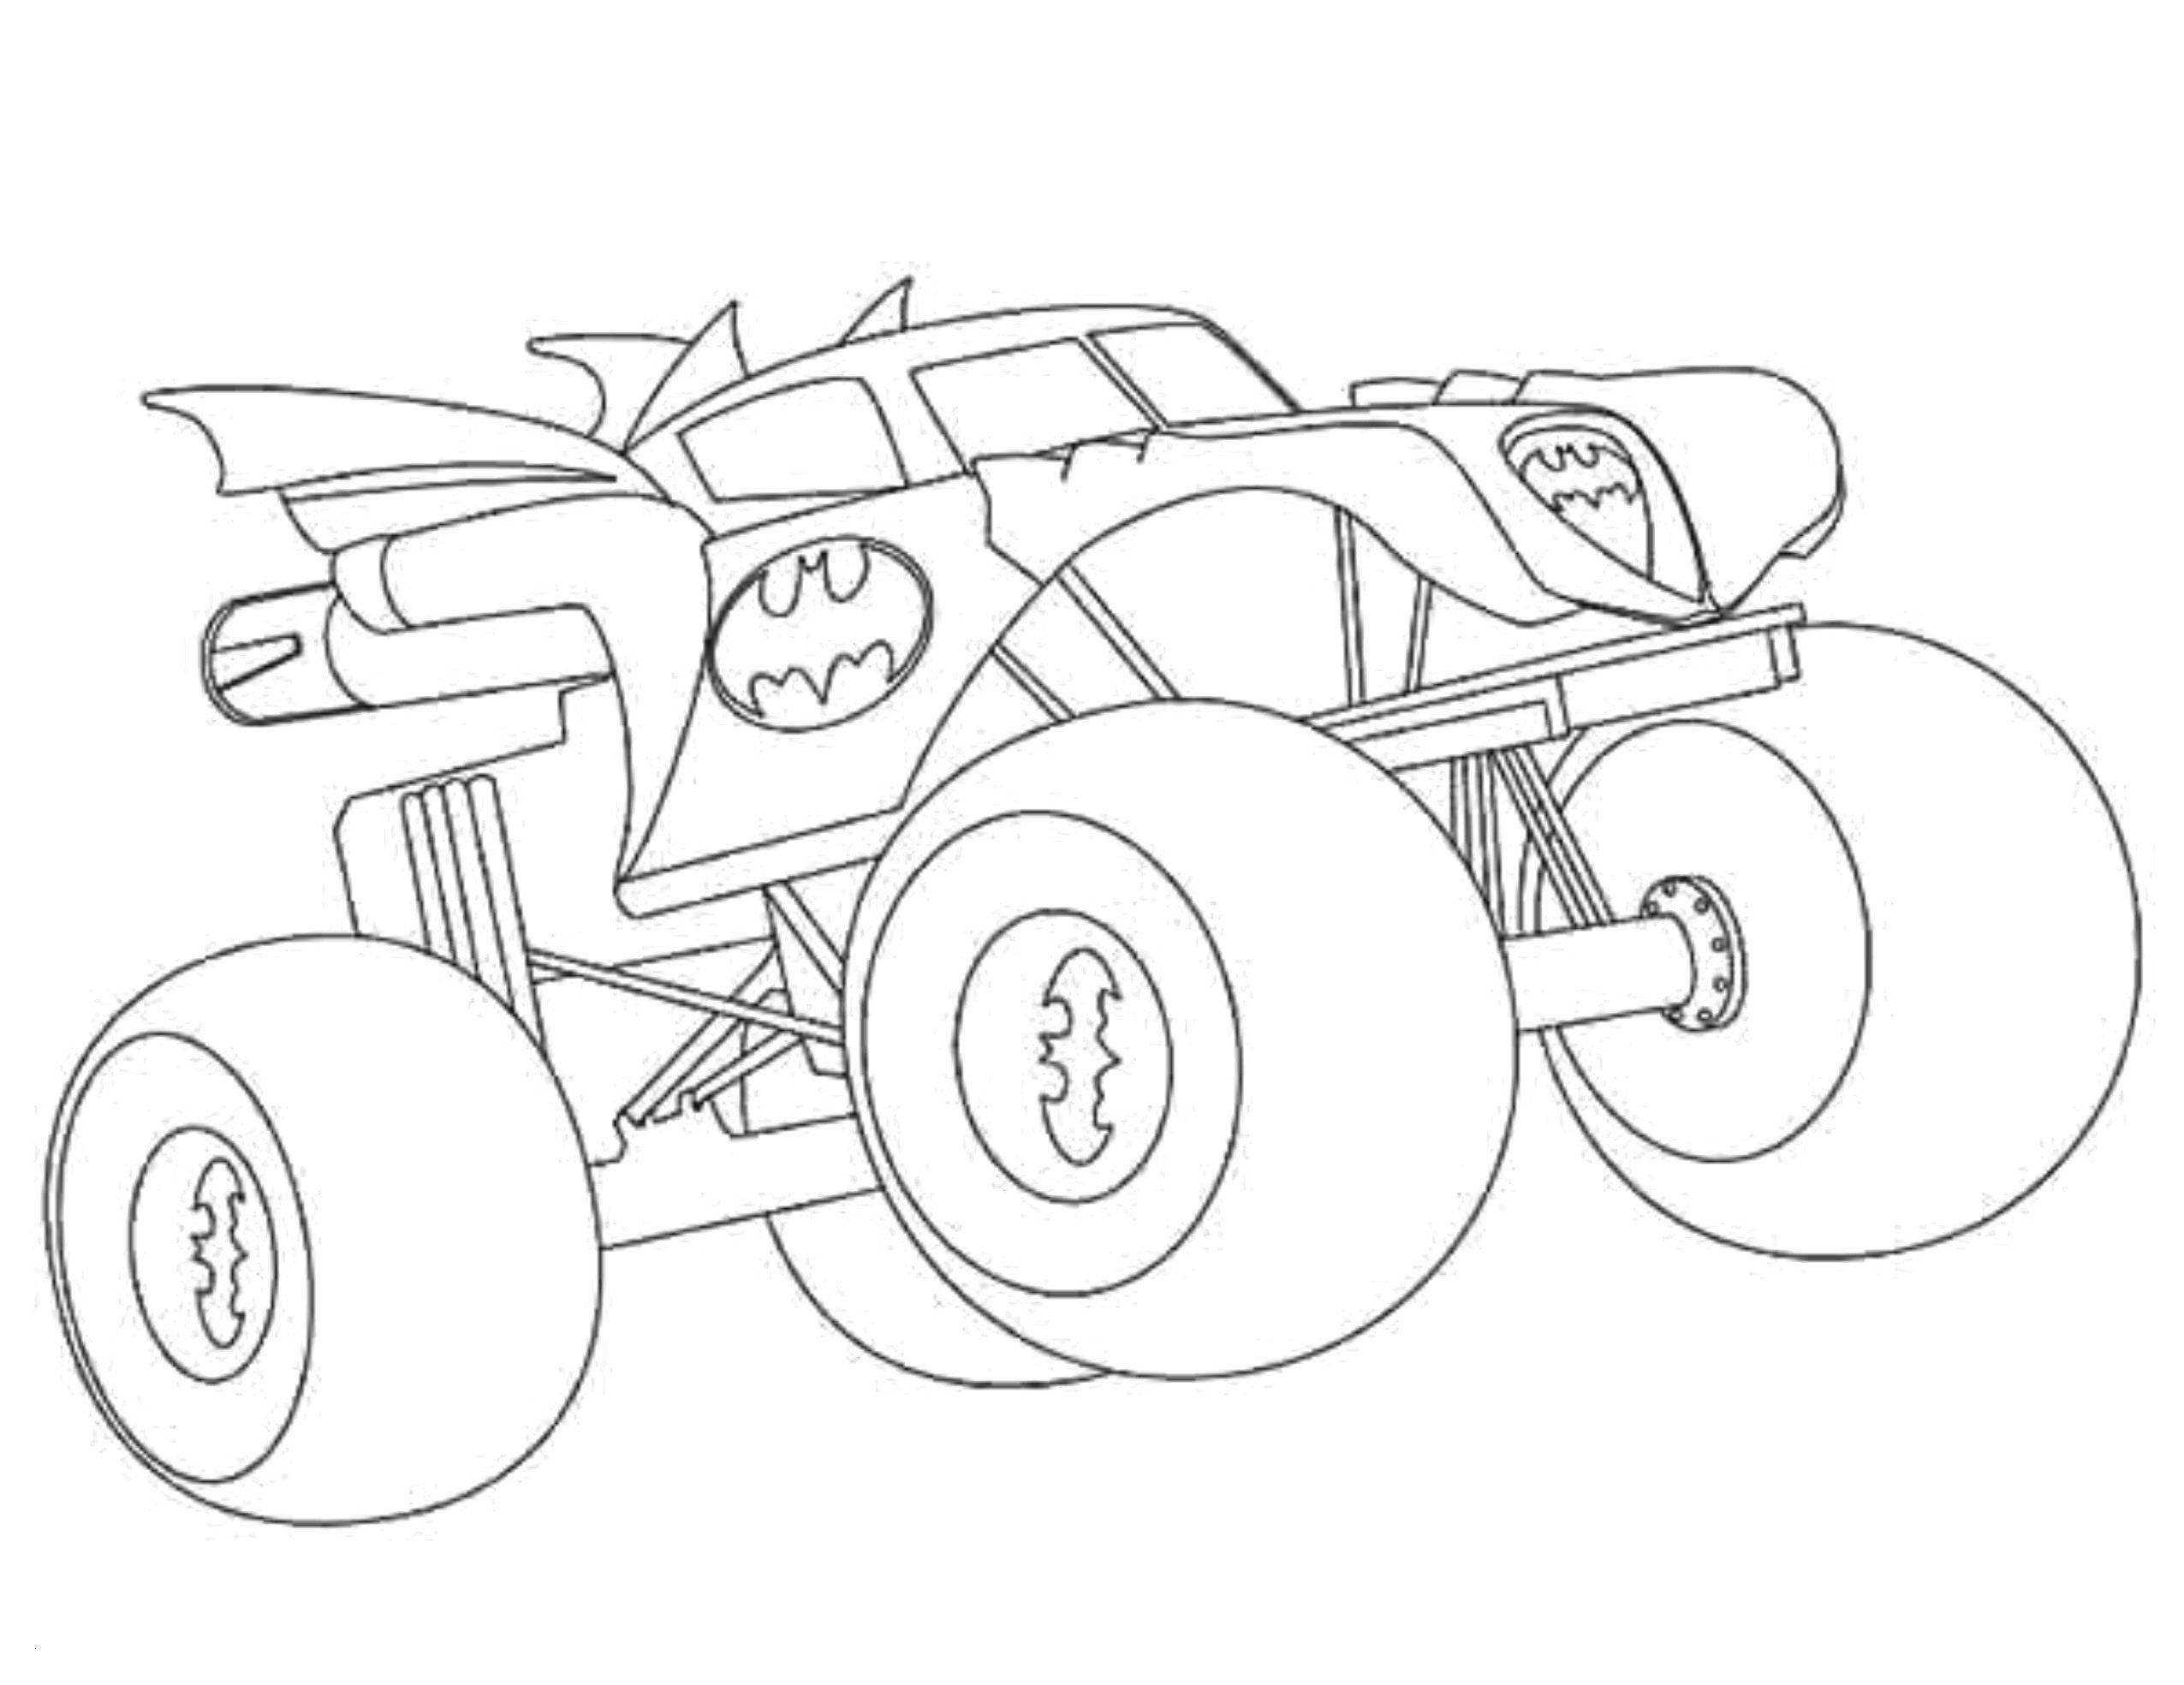 76 Immortal Hot Rod Coloring Pages For Adults